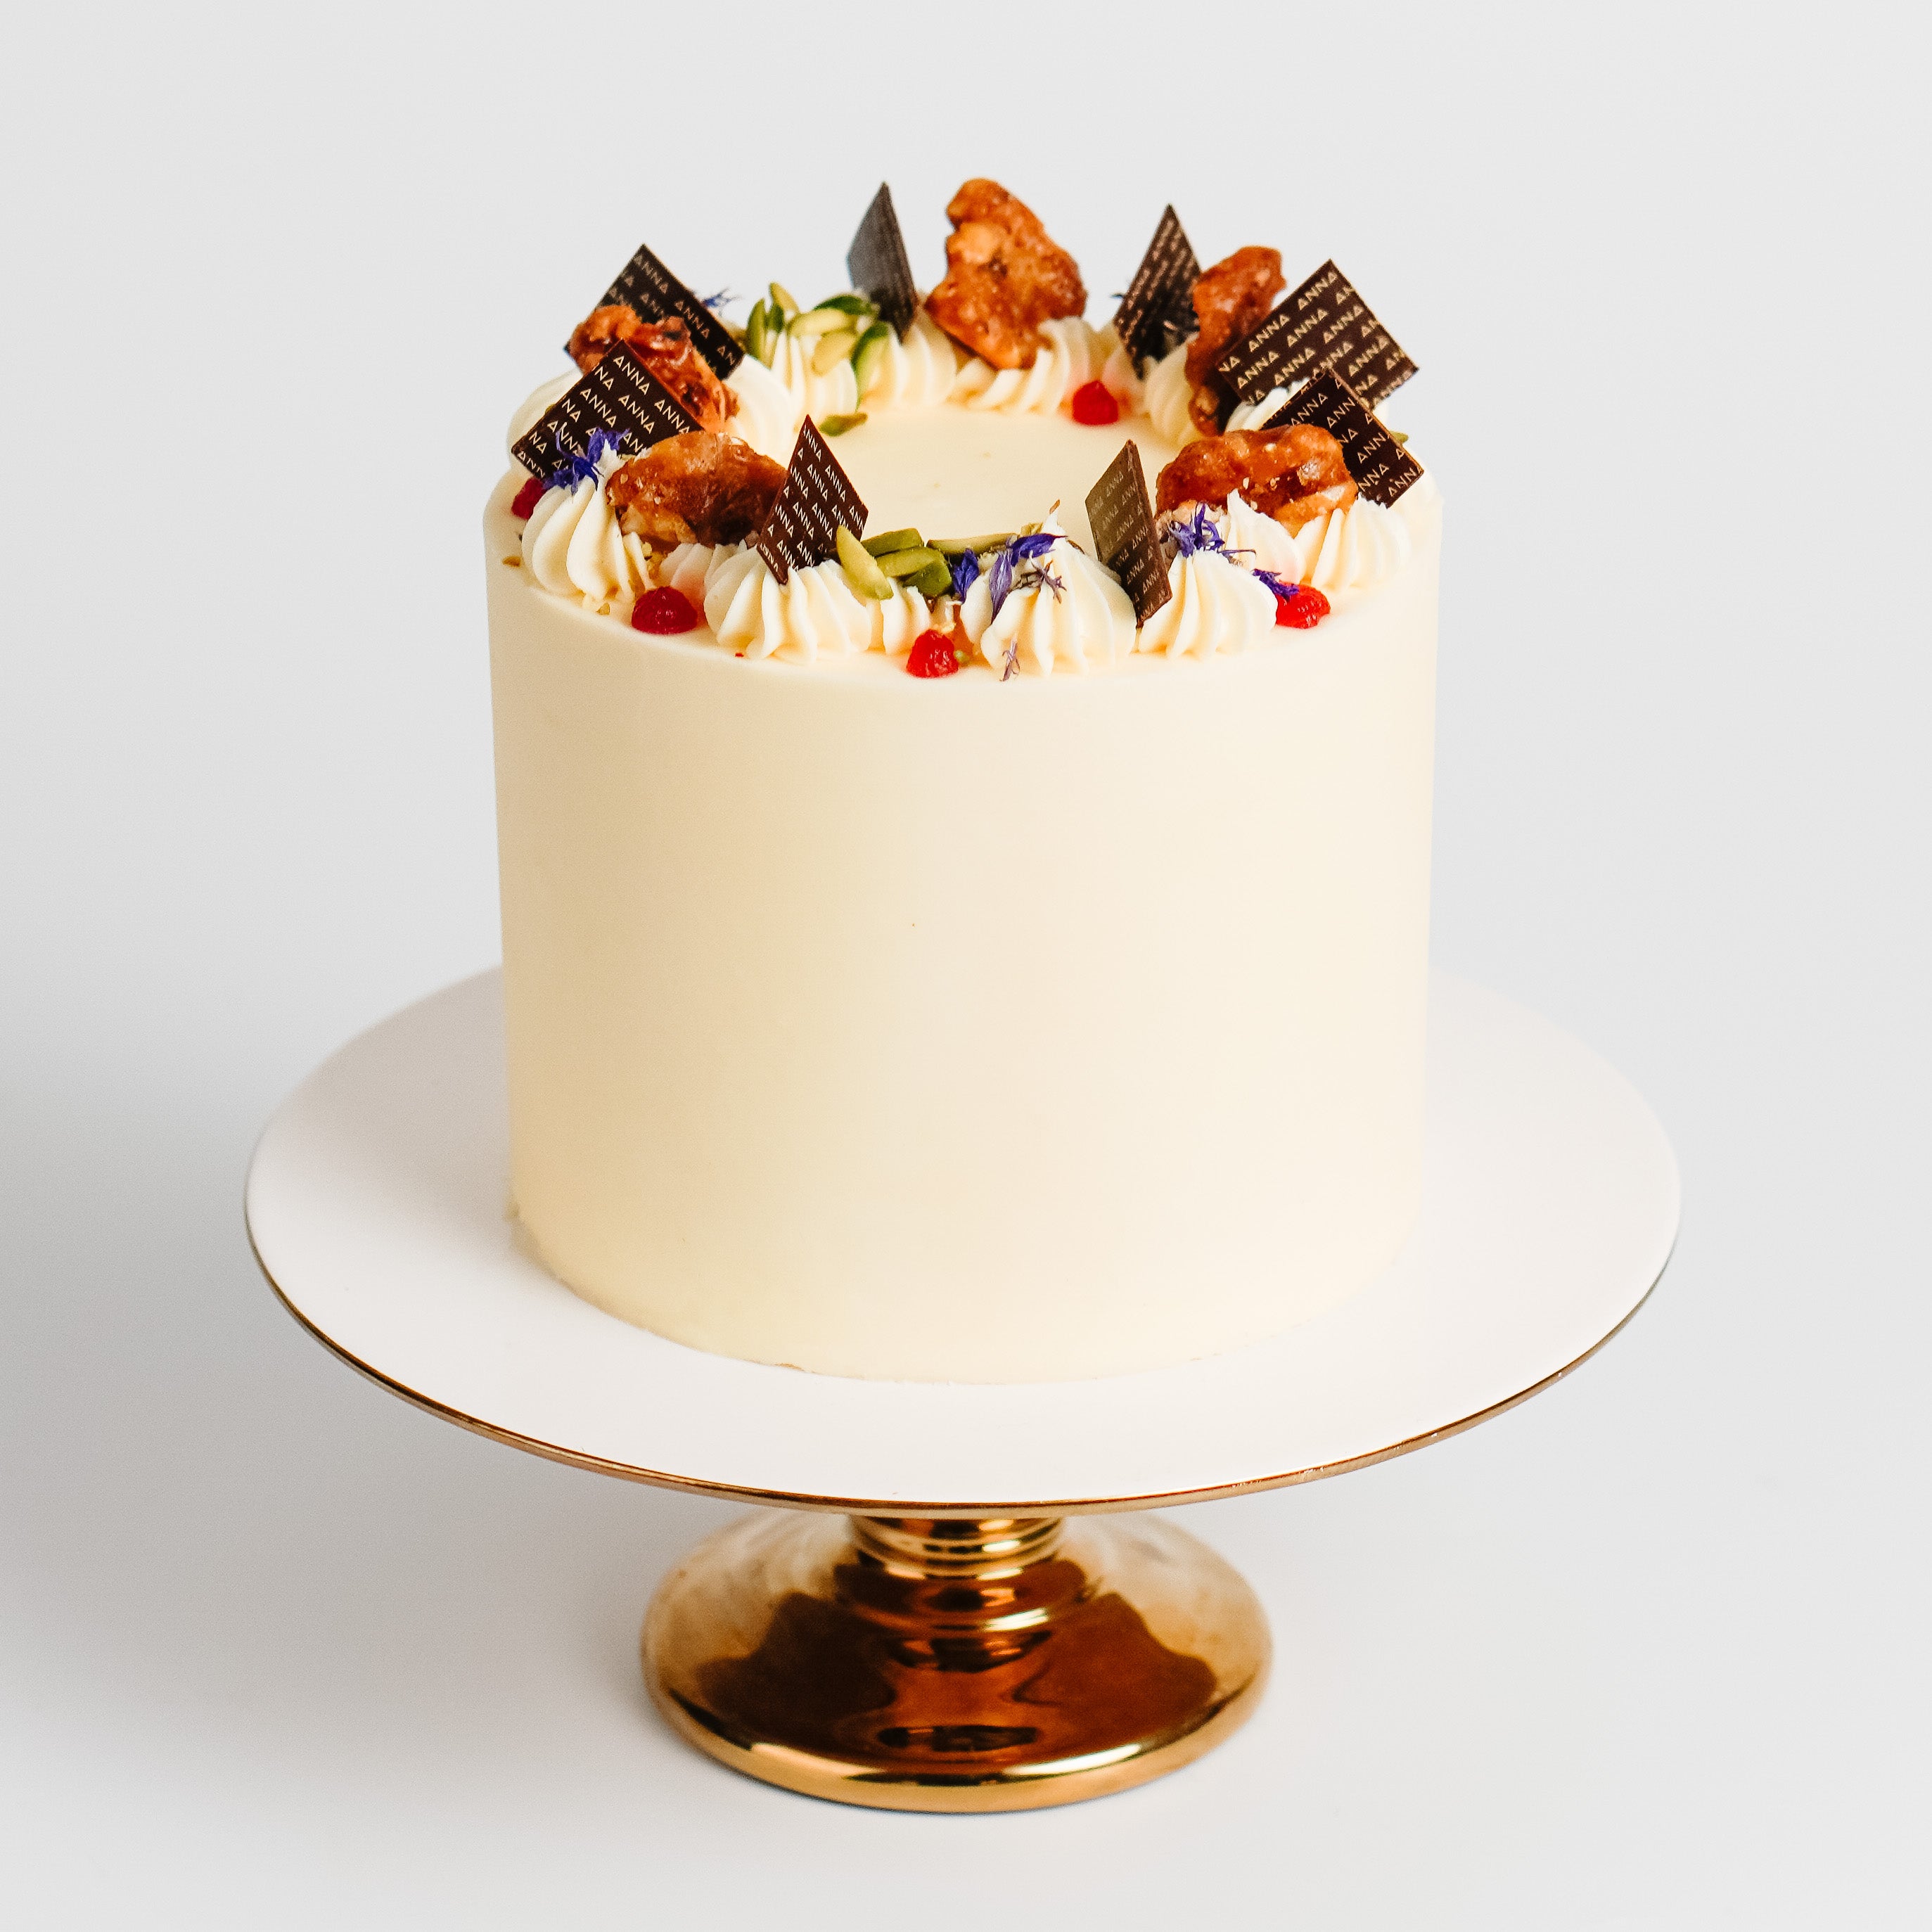 Classic Carrot Cake Recipe with Chopped Pecans